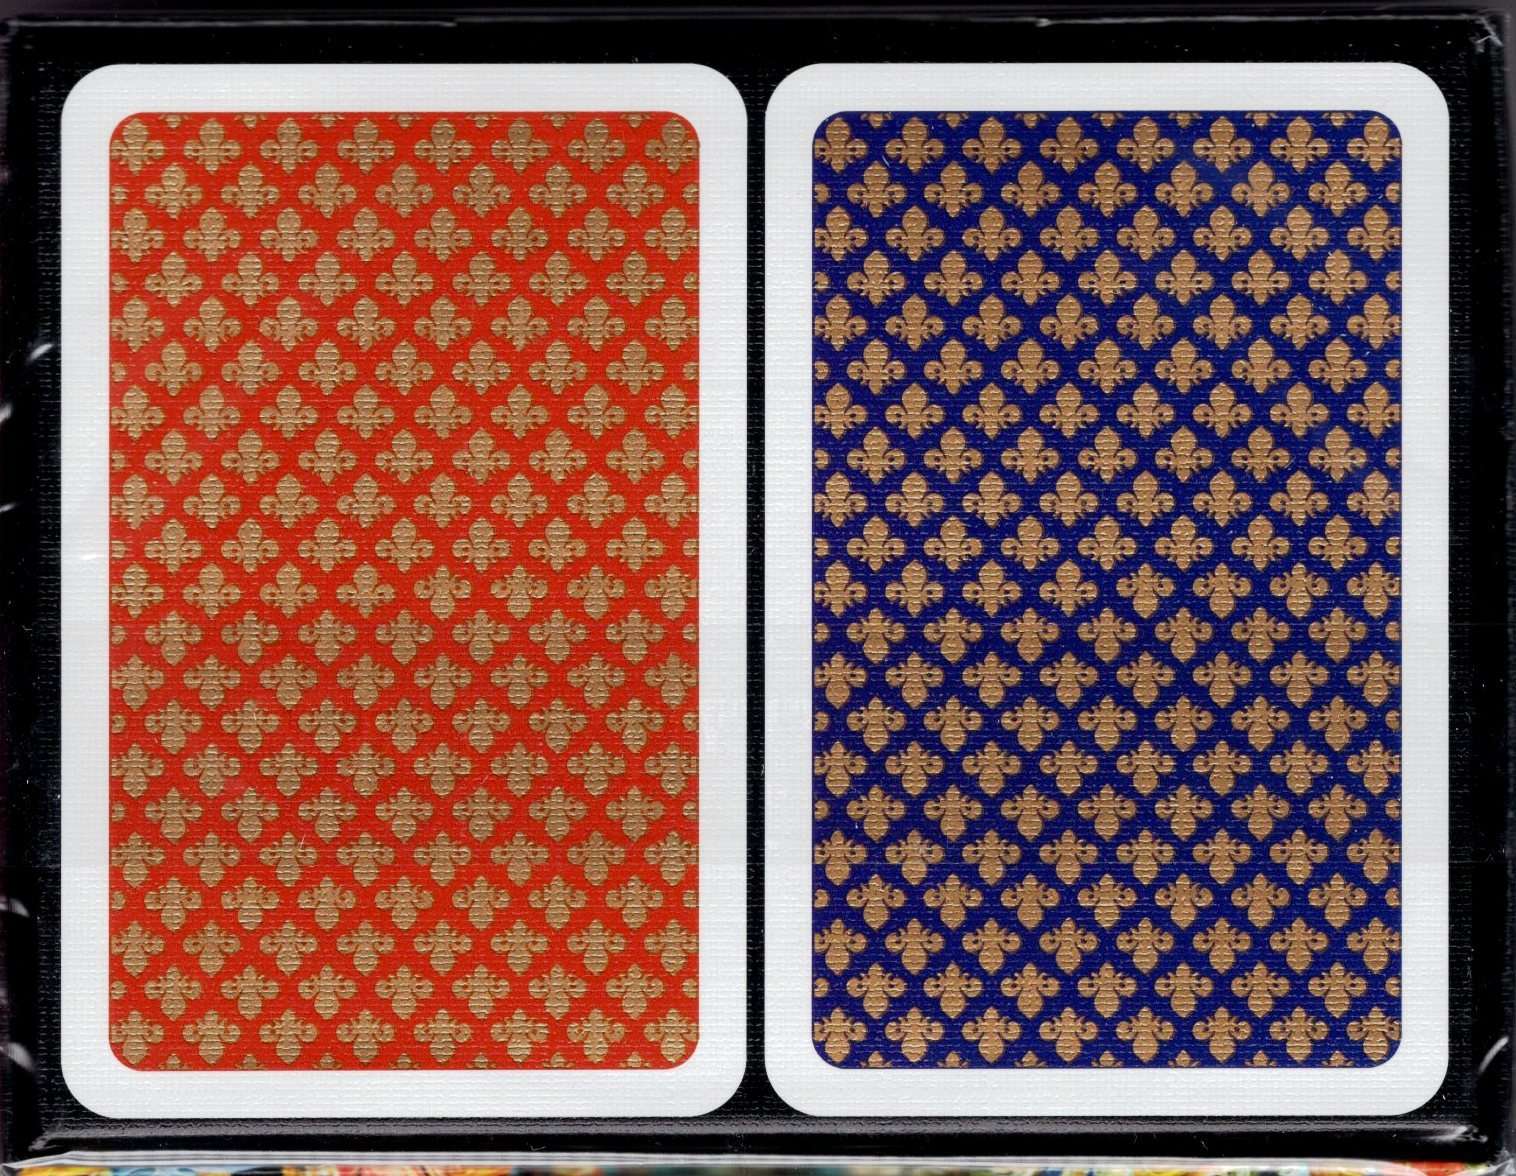 Red uno cards -  France